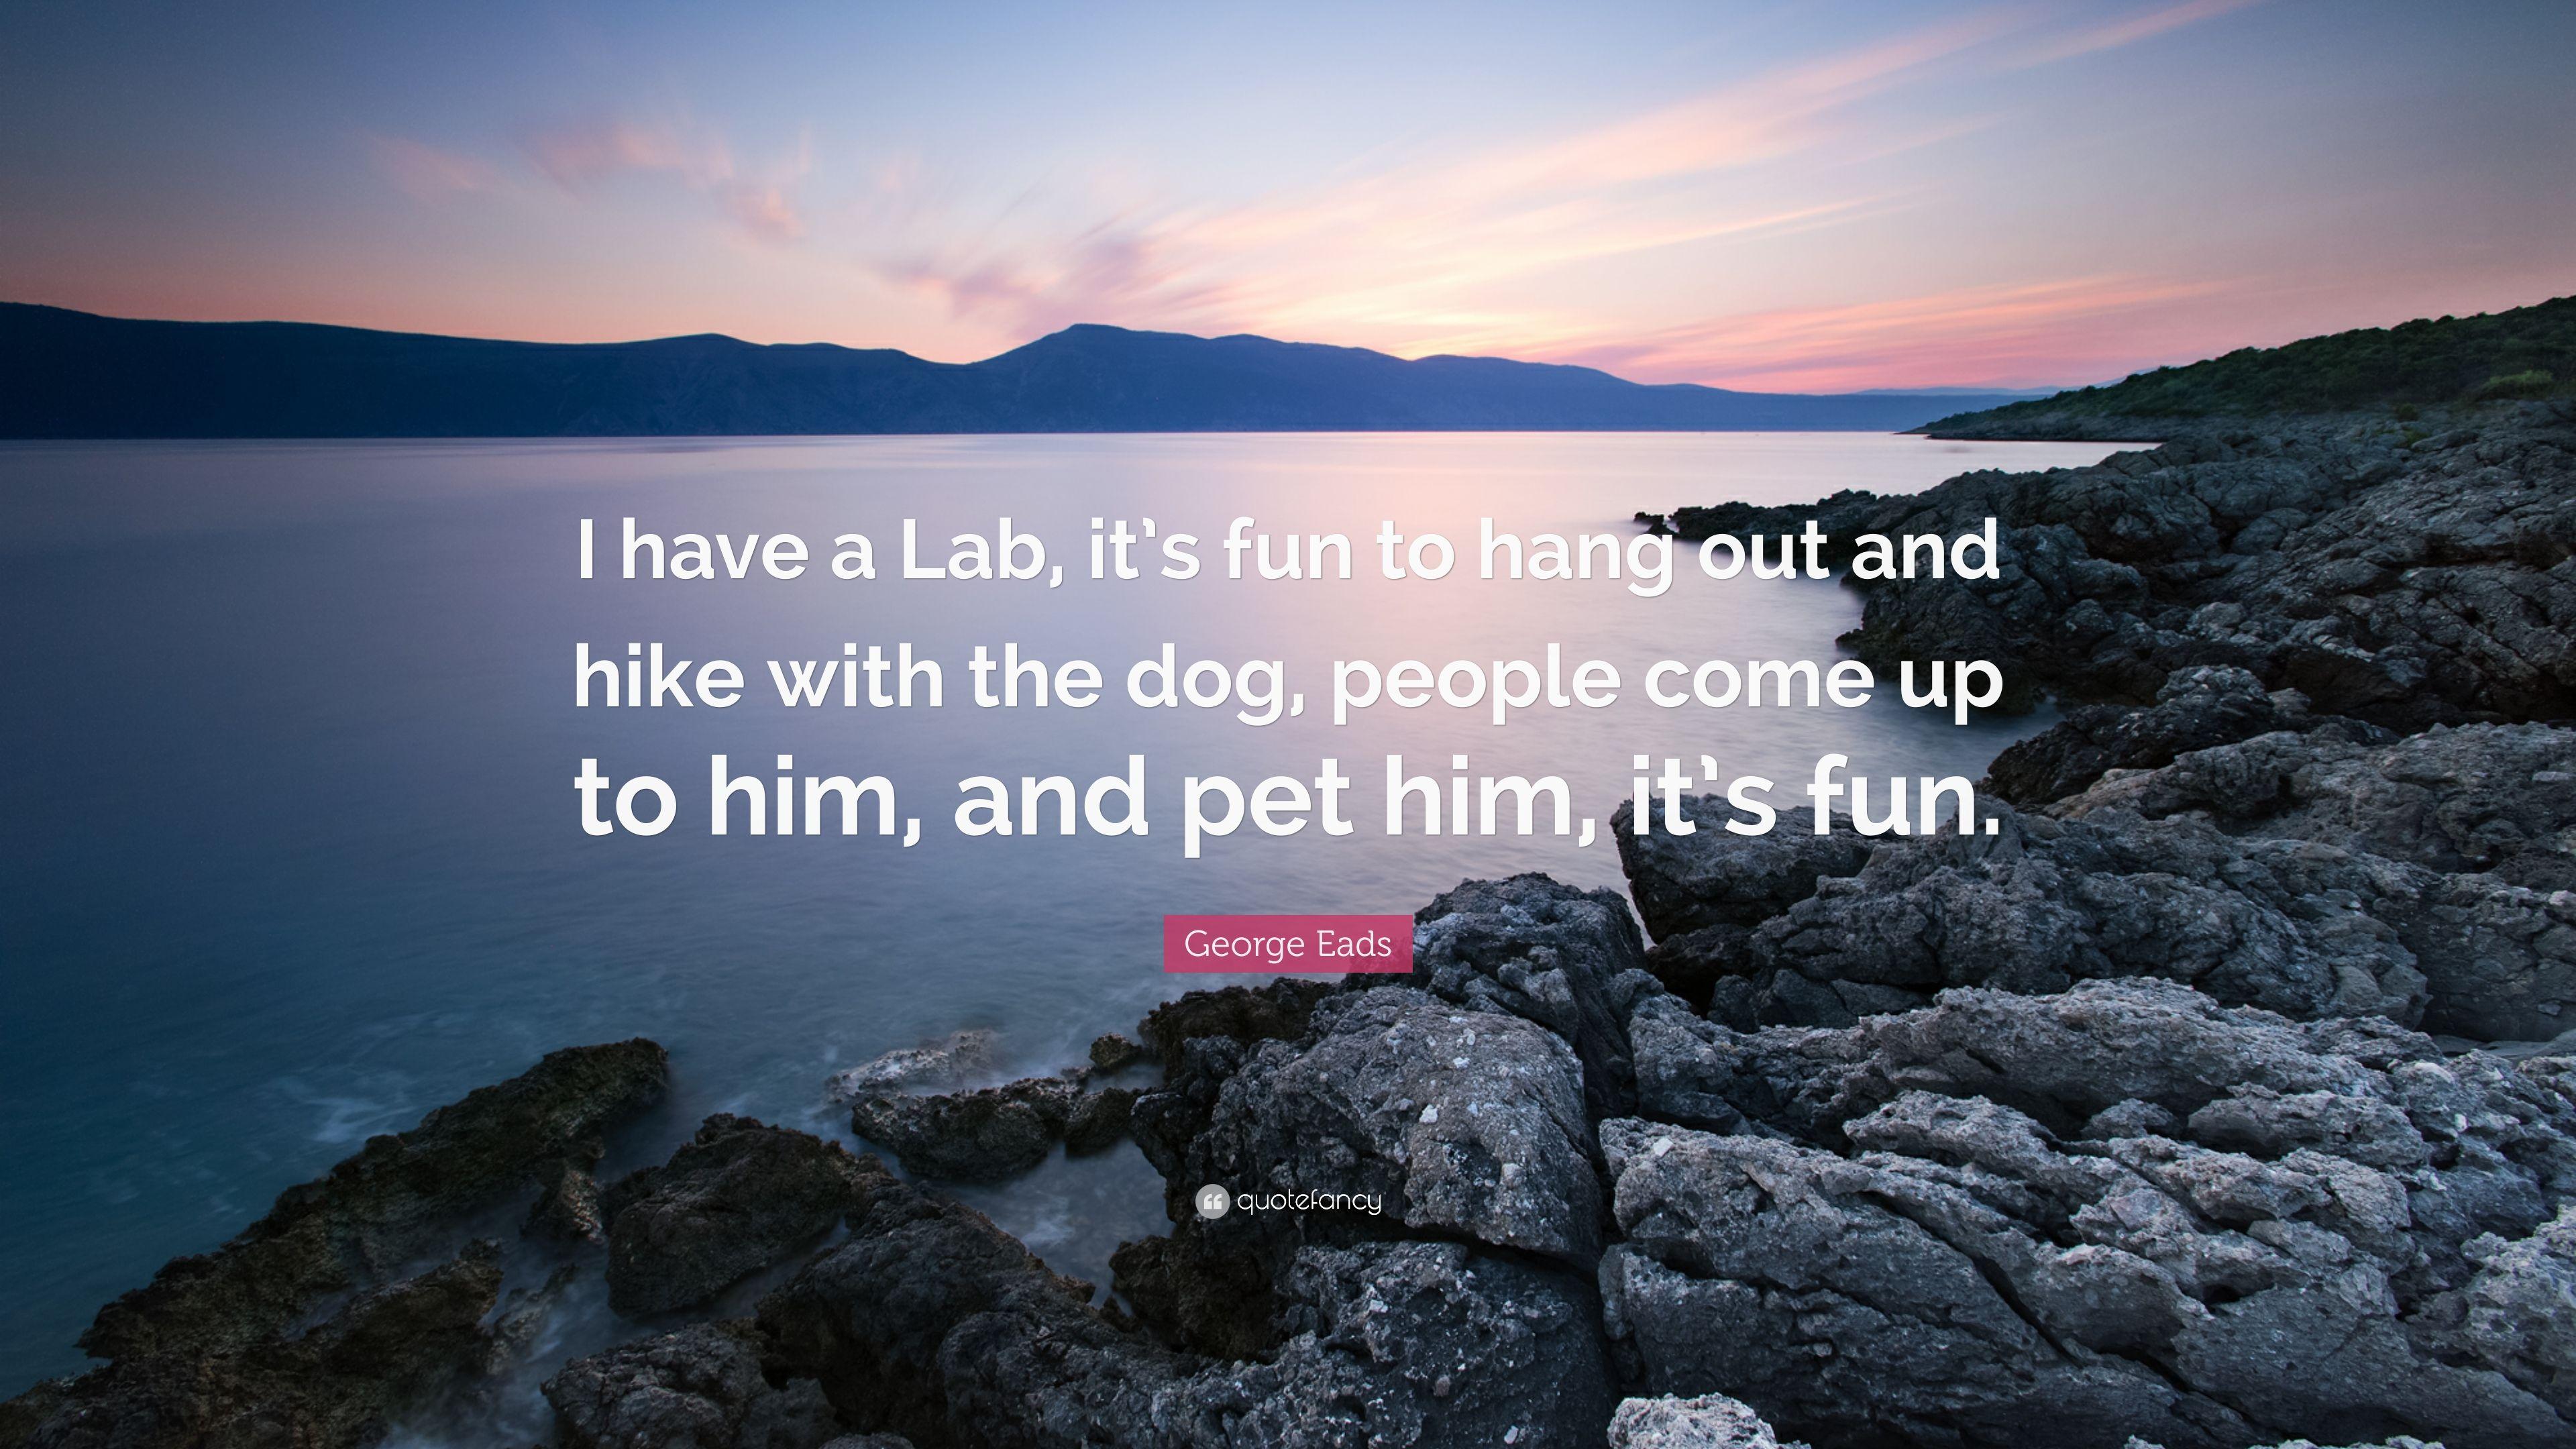 George Eads Quote: “I have a Lab, it's fun to hang out and hike